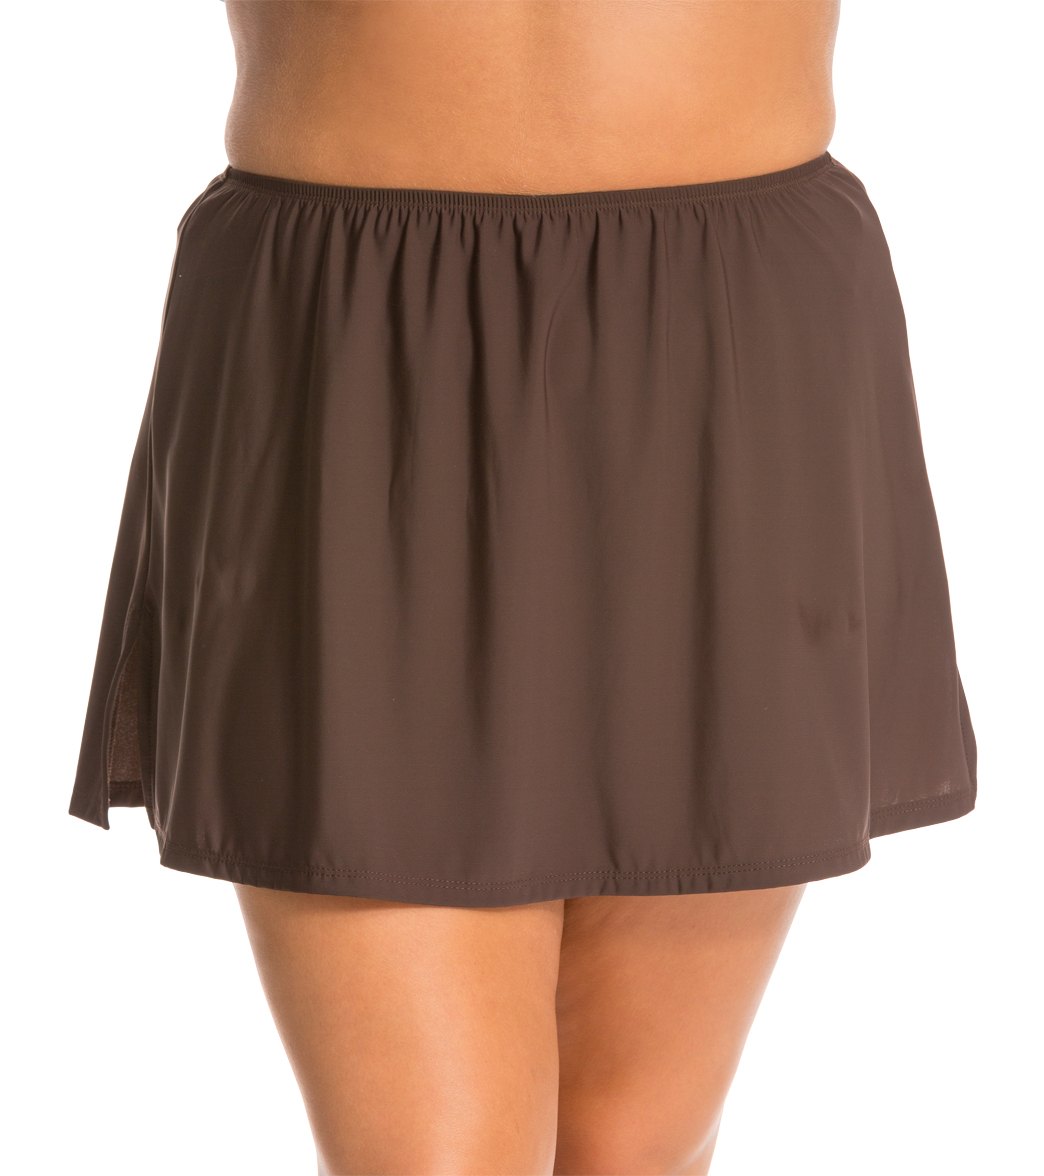 Topanga Plus Size Solid Cover Up Skirt - Brown 24W Nylon/Spandex - Swimoutlet.com